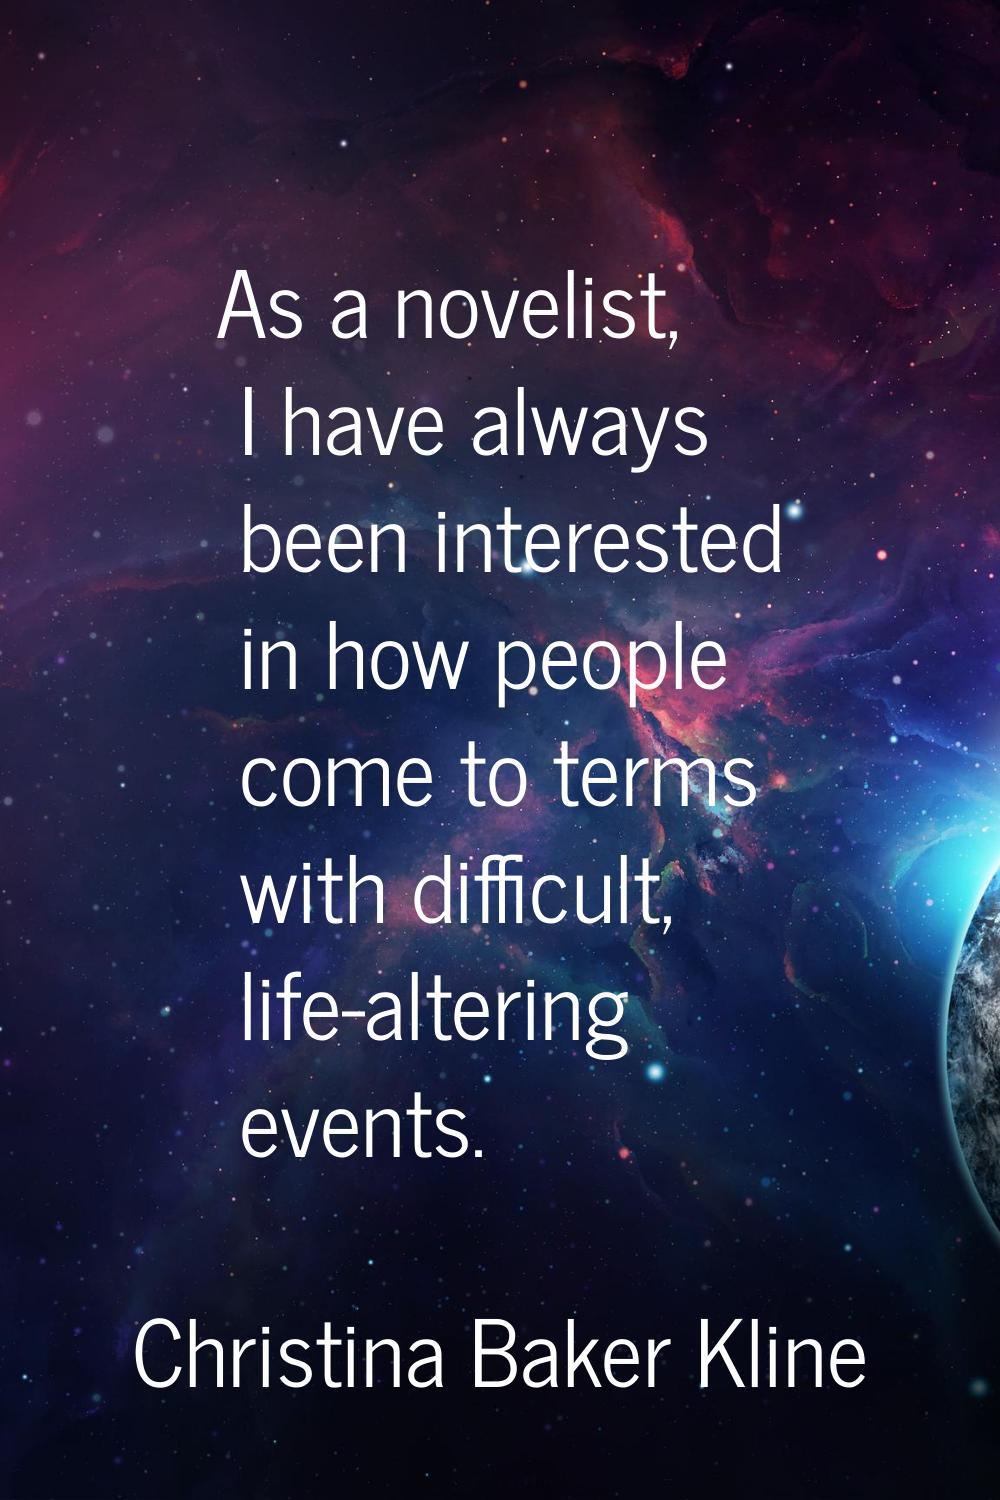 As a novelist, I have always been interested in how people come to terms with difficult, life-alter